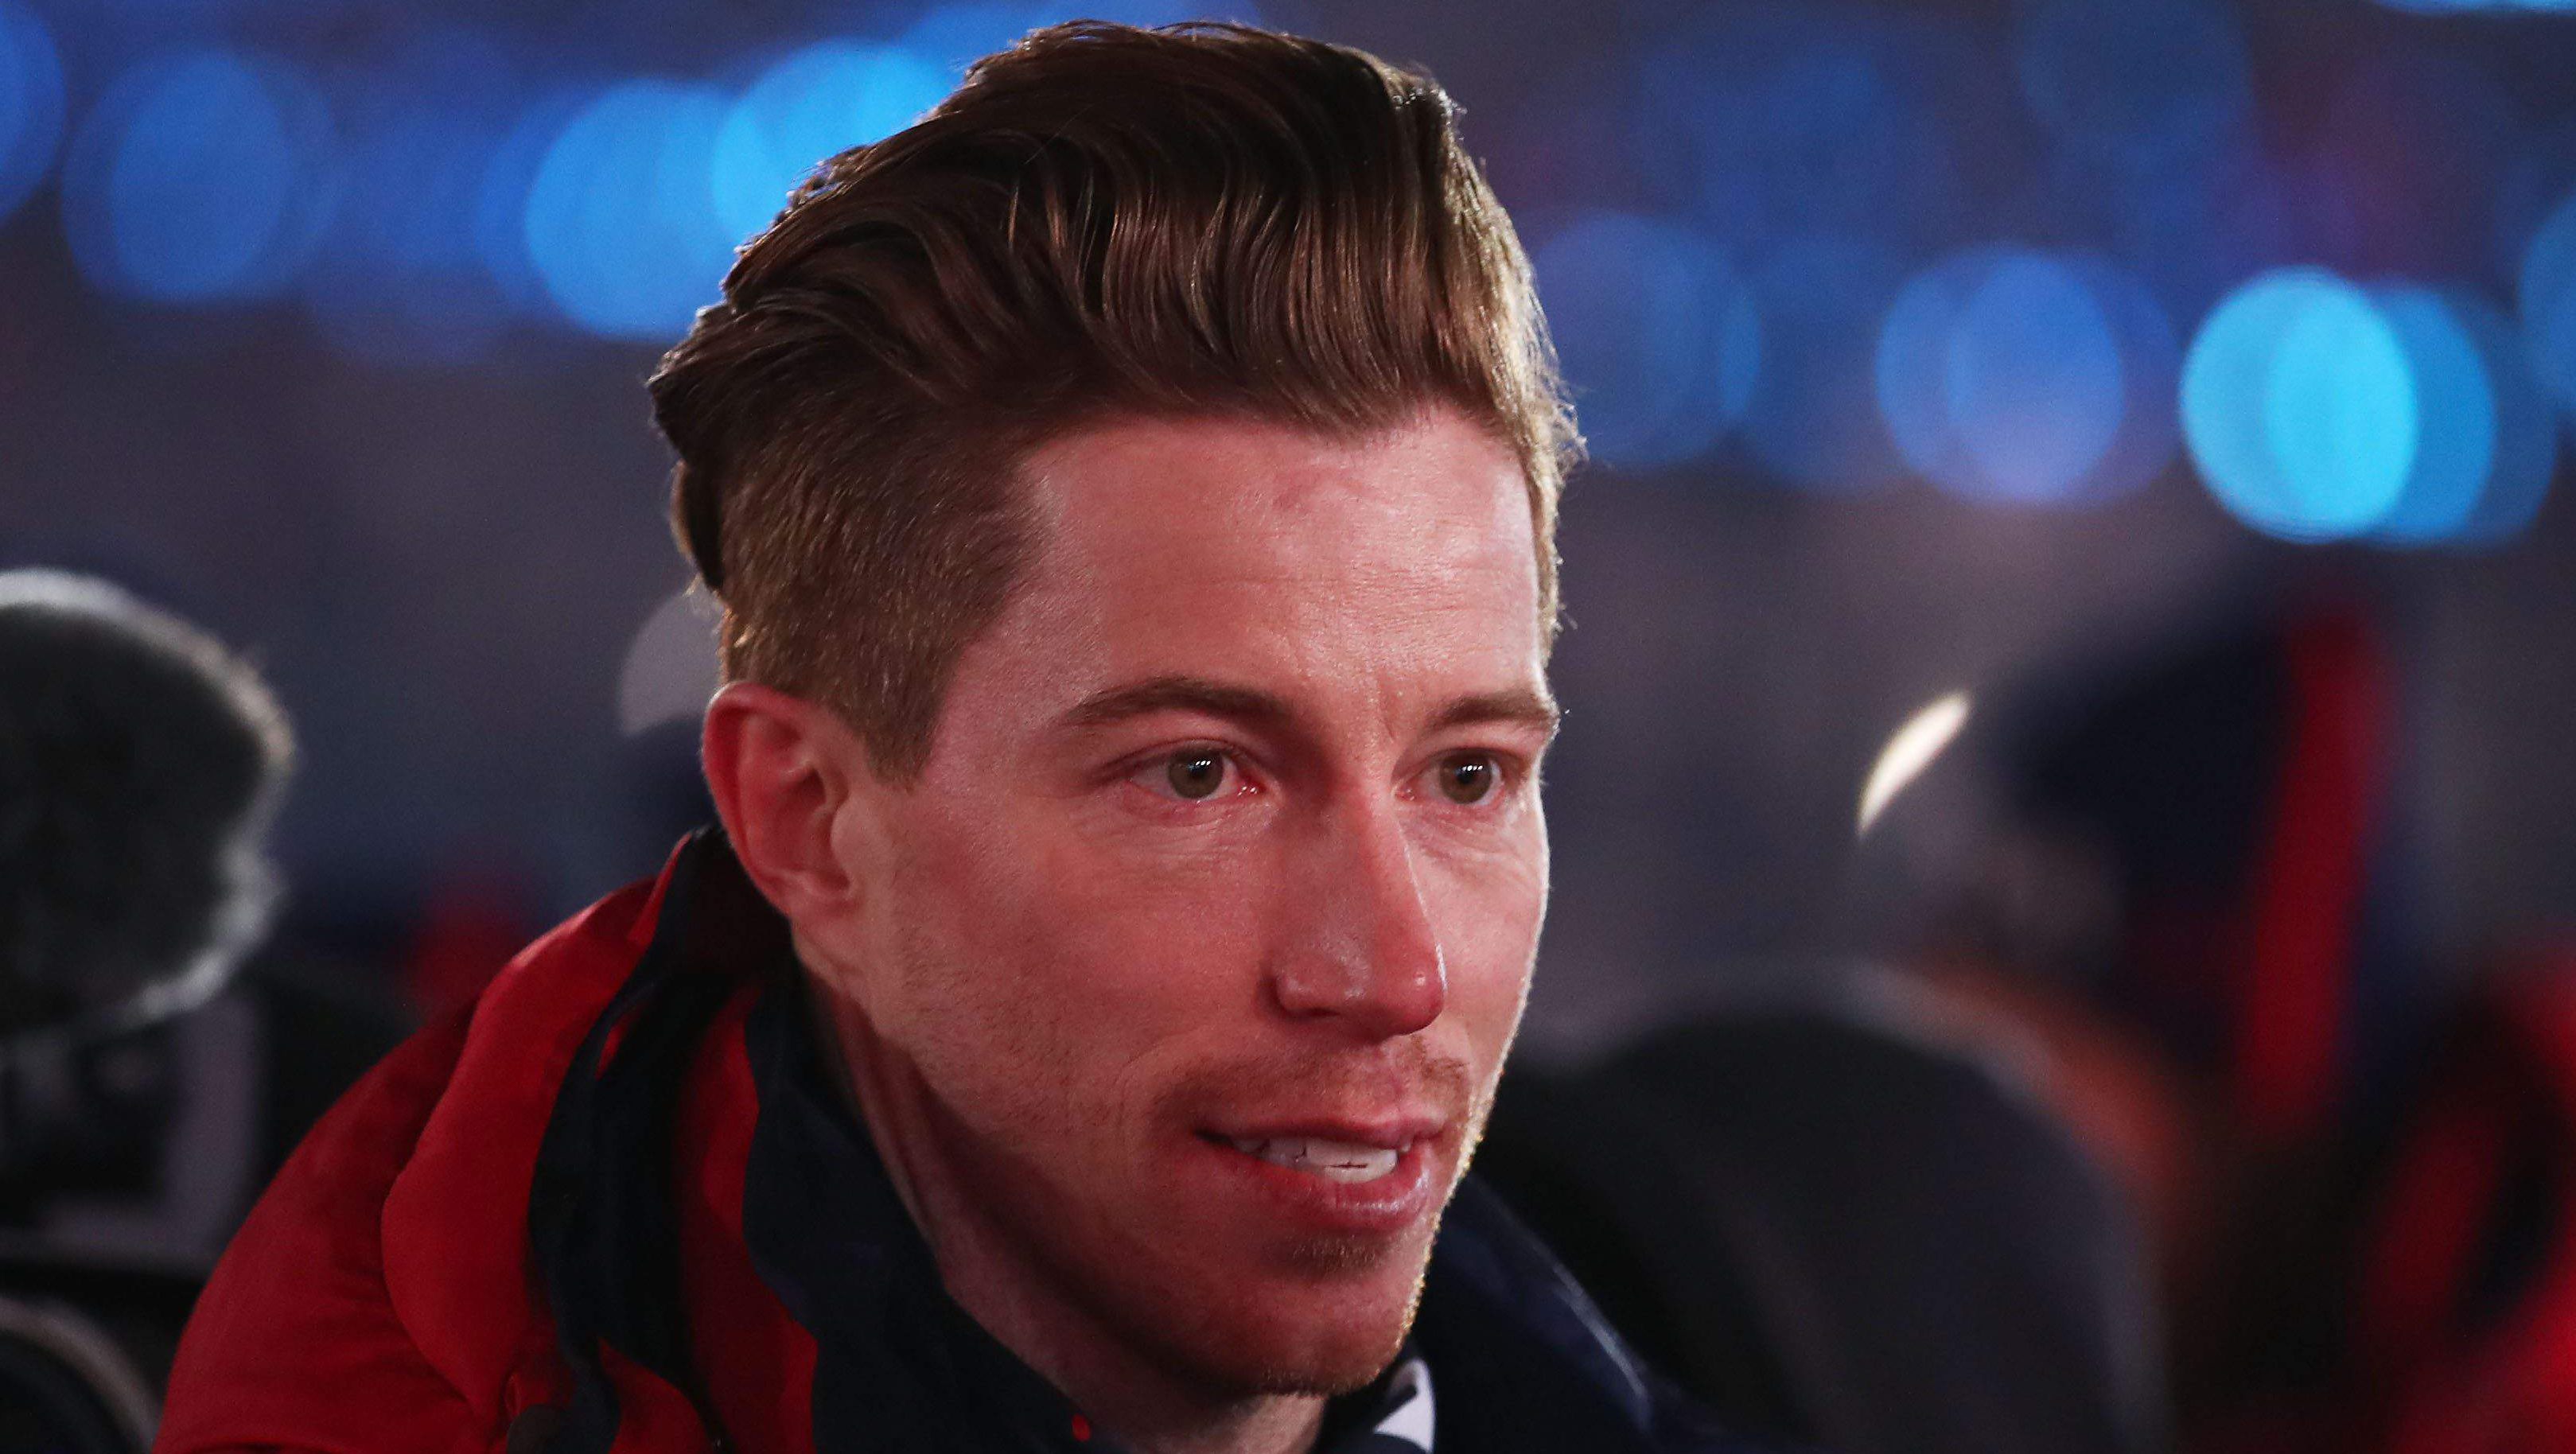 How Old Is Shaun White?